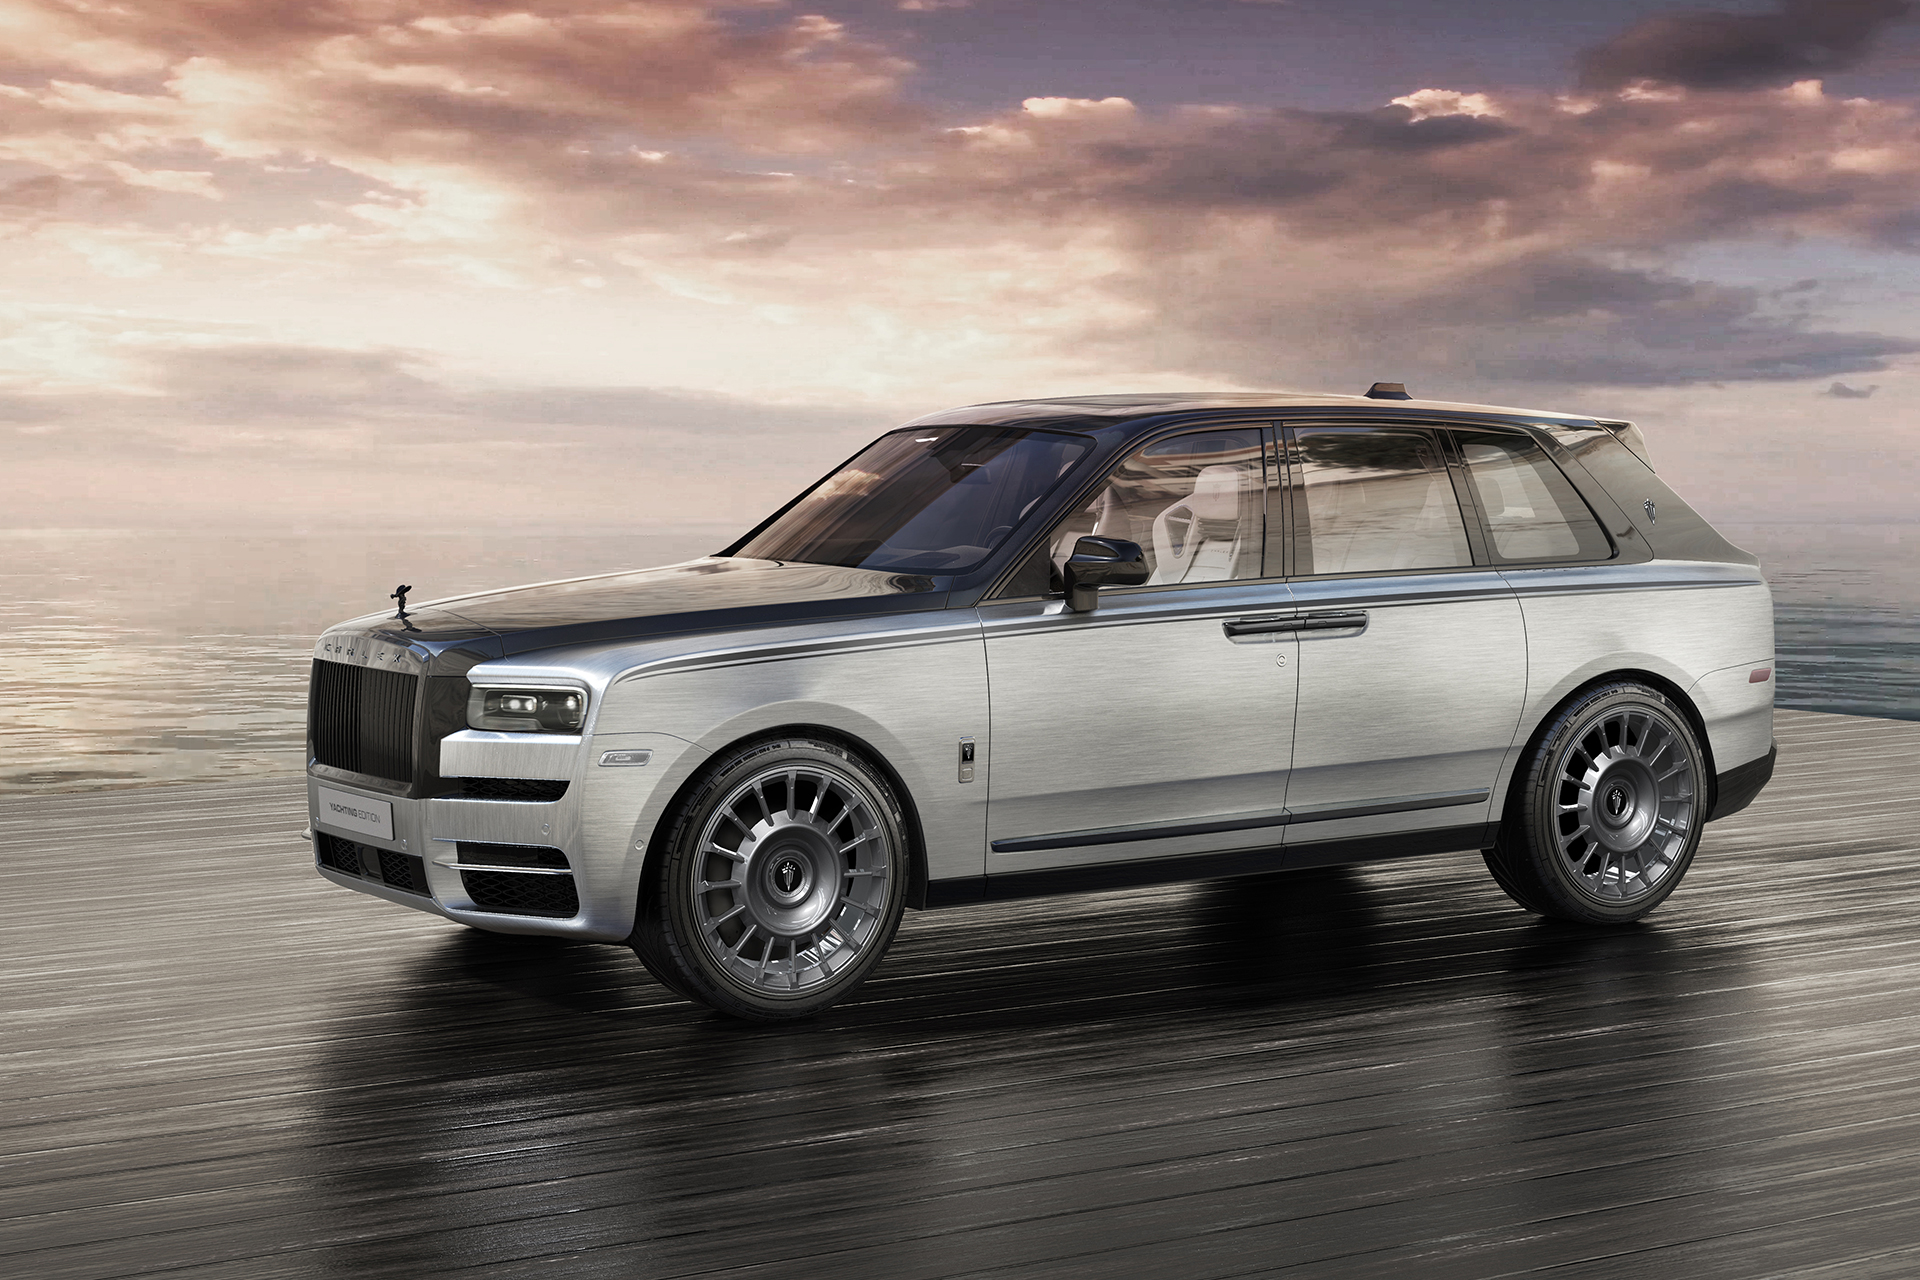 The RollsRoyce fit for a Billionaire Meet the RollsRoyce Cullinan  Billionaire Exclusive SUV from MANSORY in detail